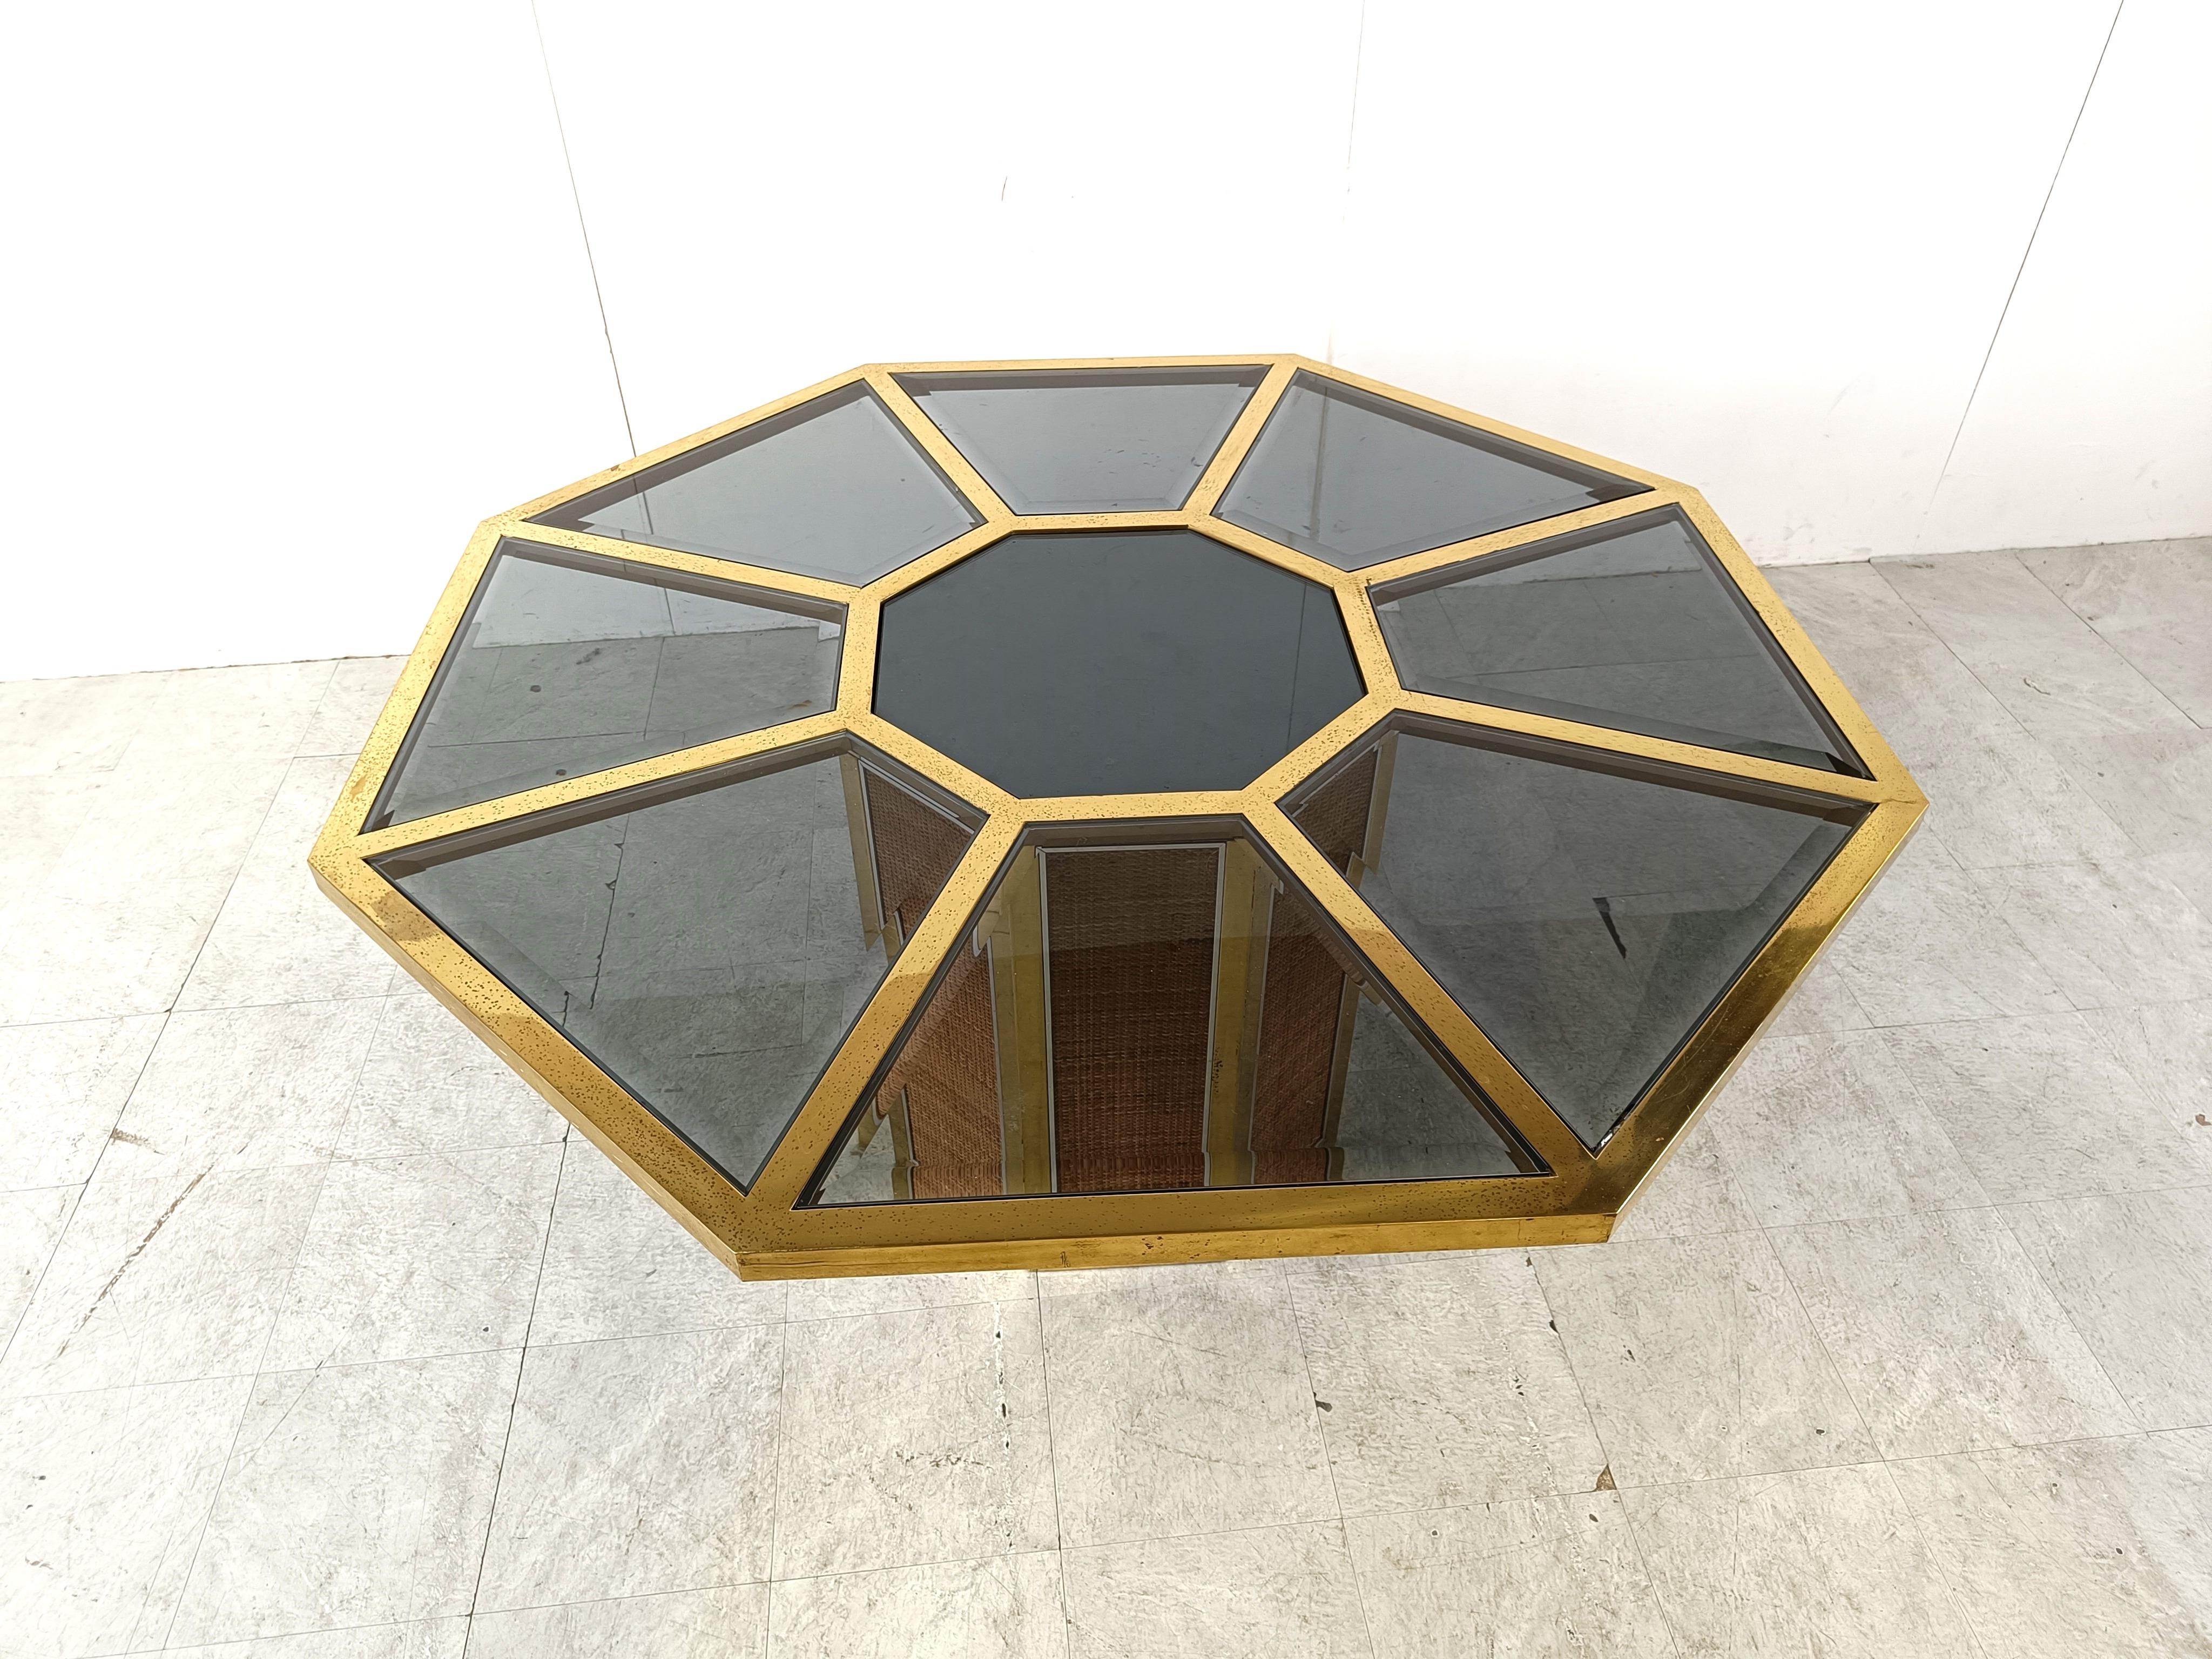 Hollywood regency dining table by Romeo Rega/

Made from an octogonal brass frame with inlaid mirrored glass.

The base is made from brass with wicker panels.

Condition: Some glasses have chips and the frame has some patina/wear. - Overall good